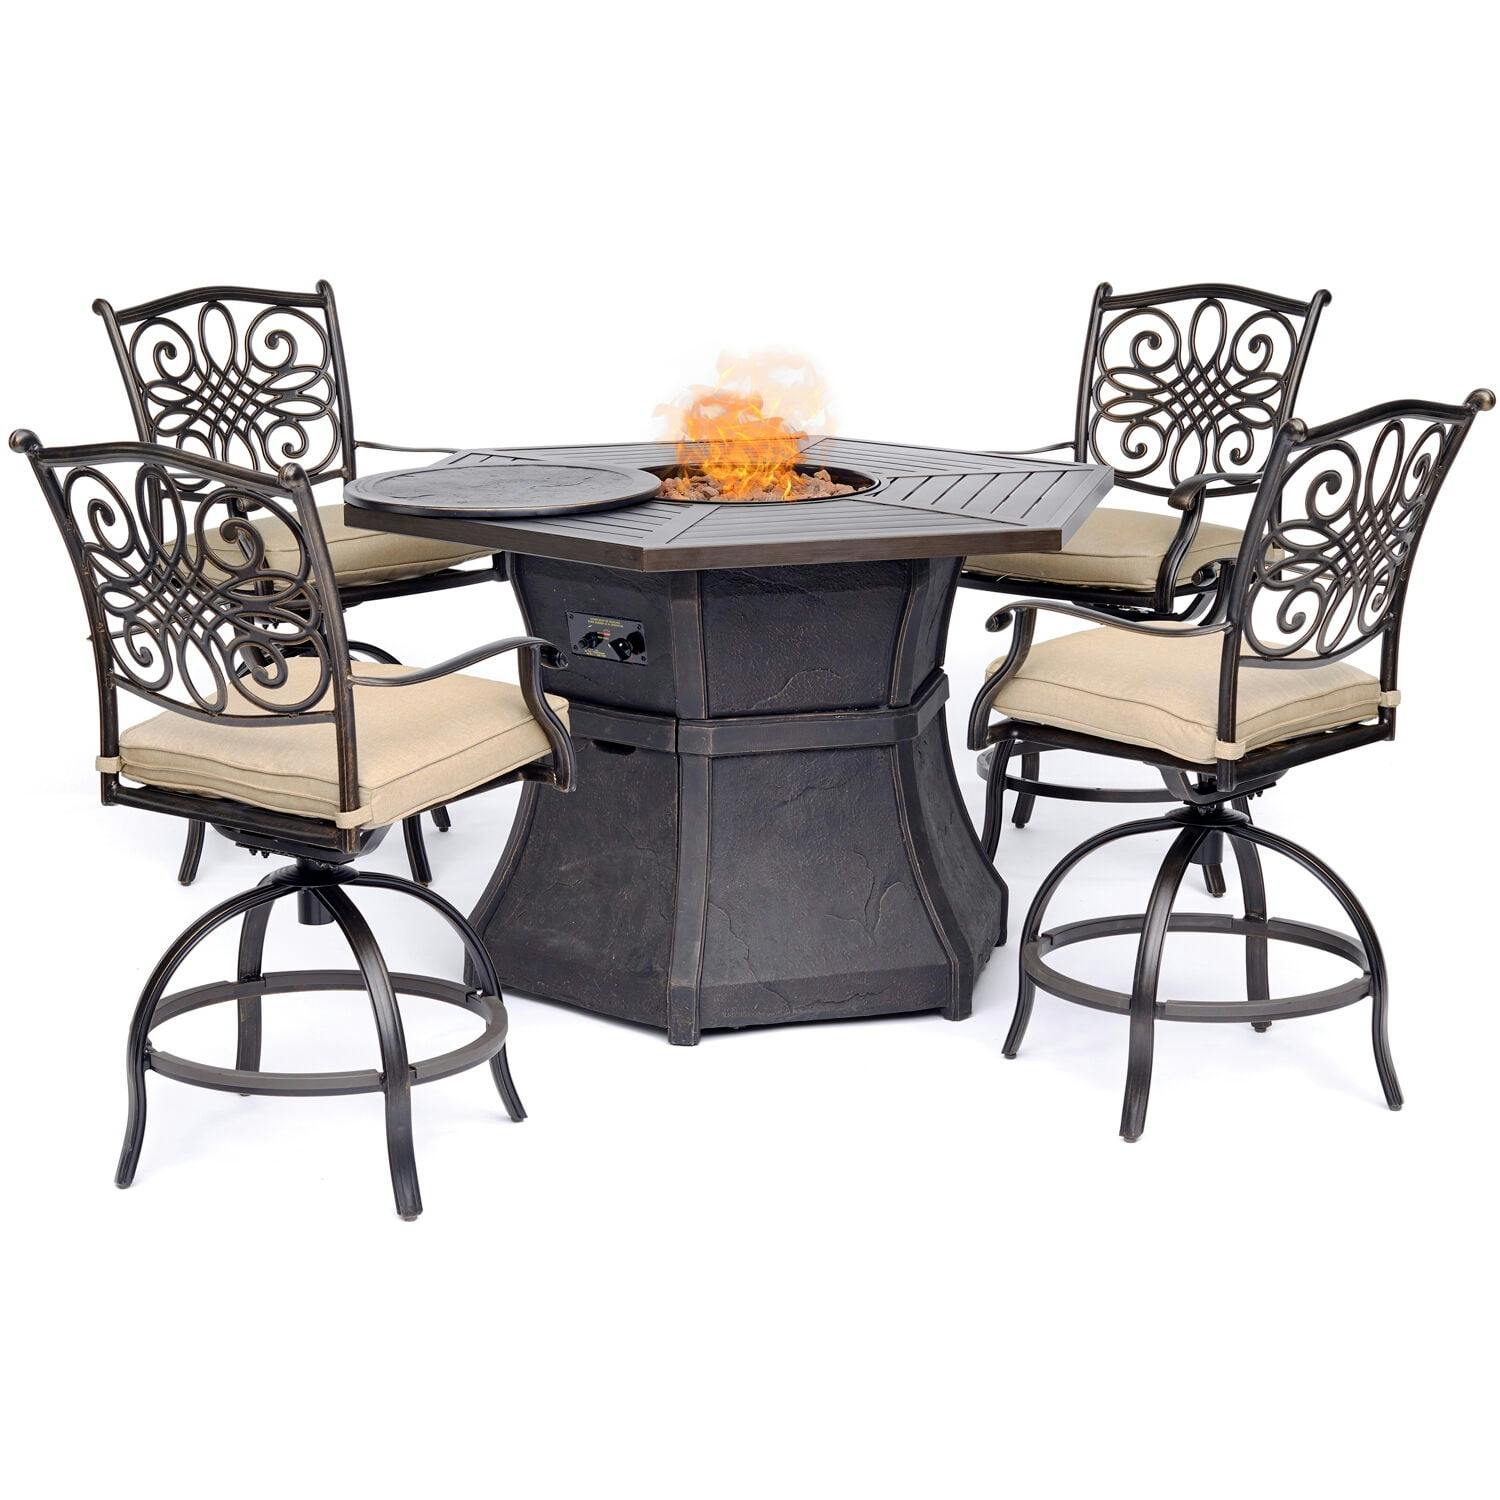 Tan Elegance 48" Aluminum High-Dining Fire Pit Set with 4 Swivel Chairs